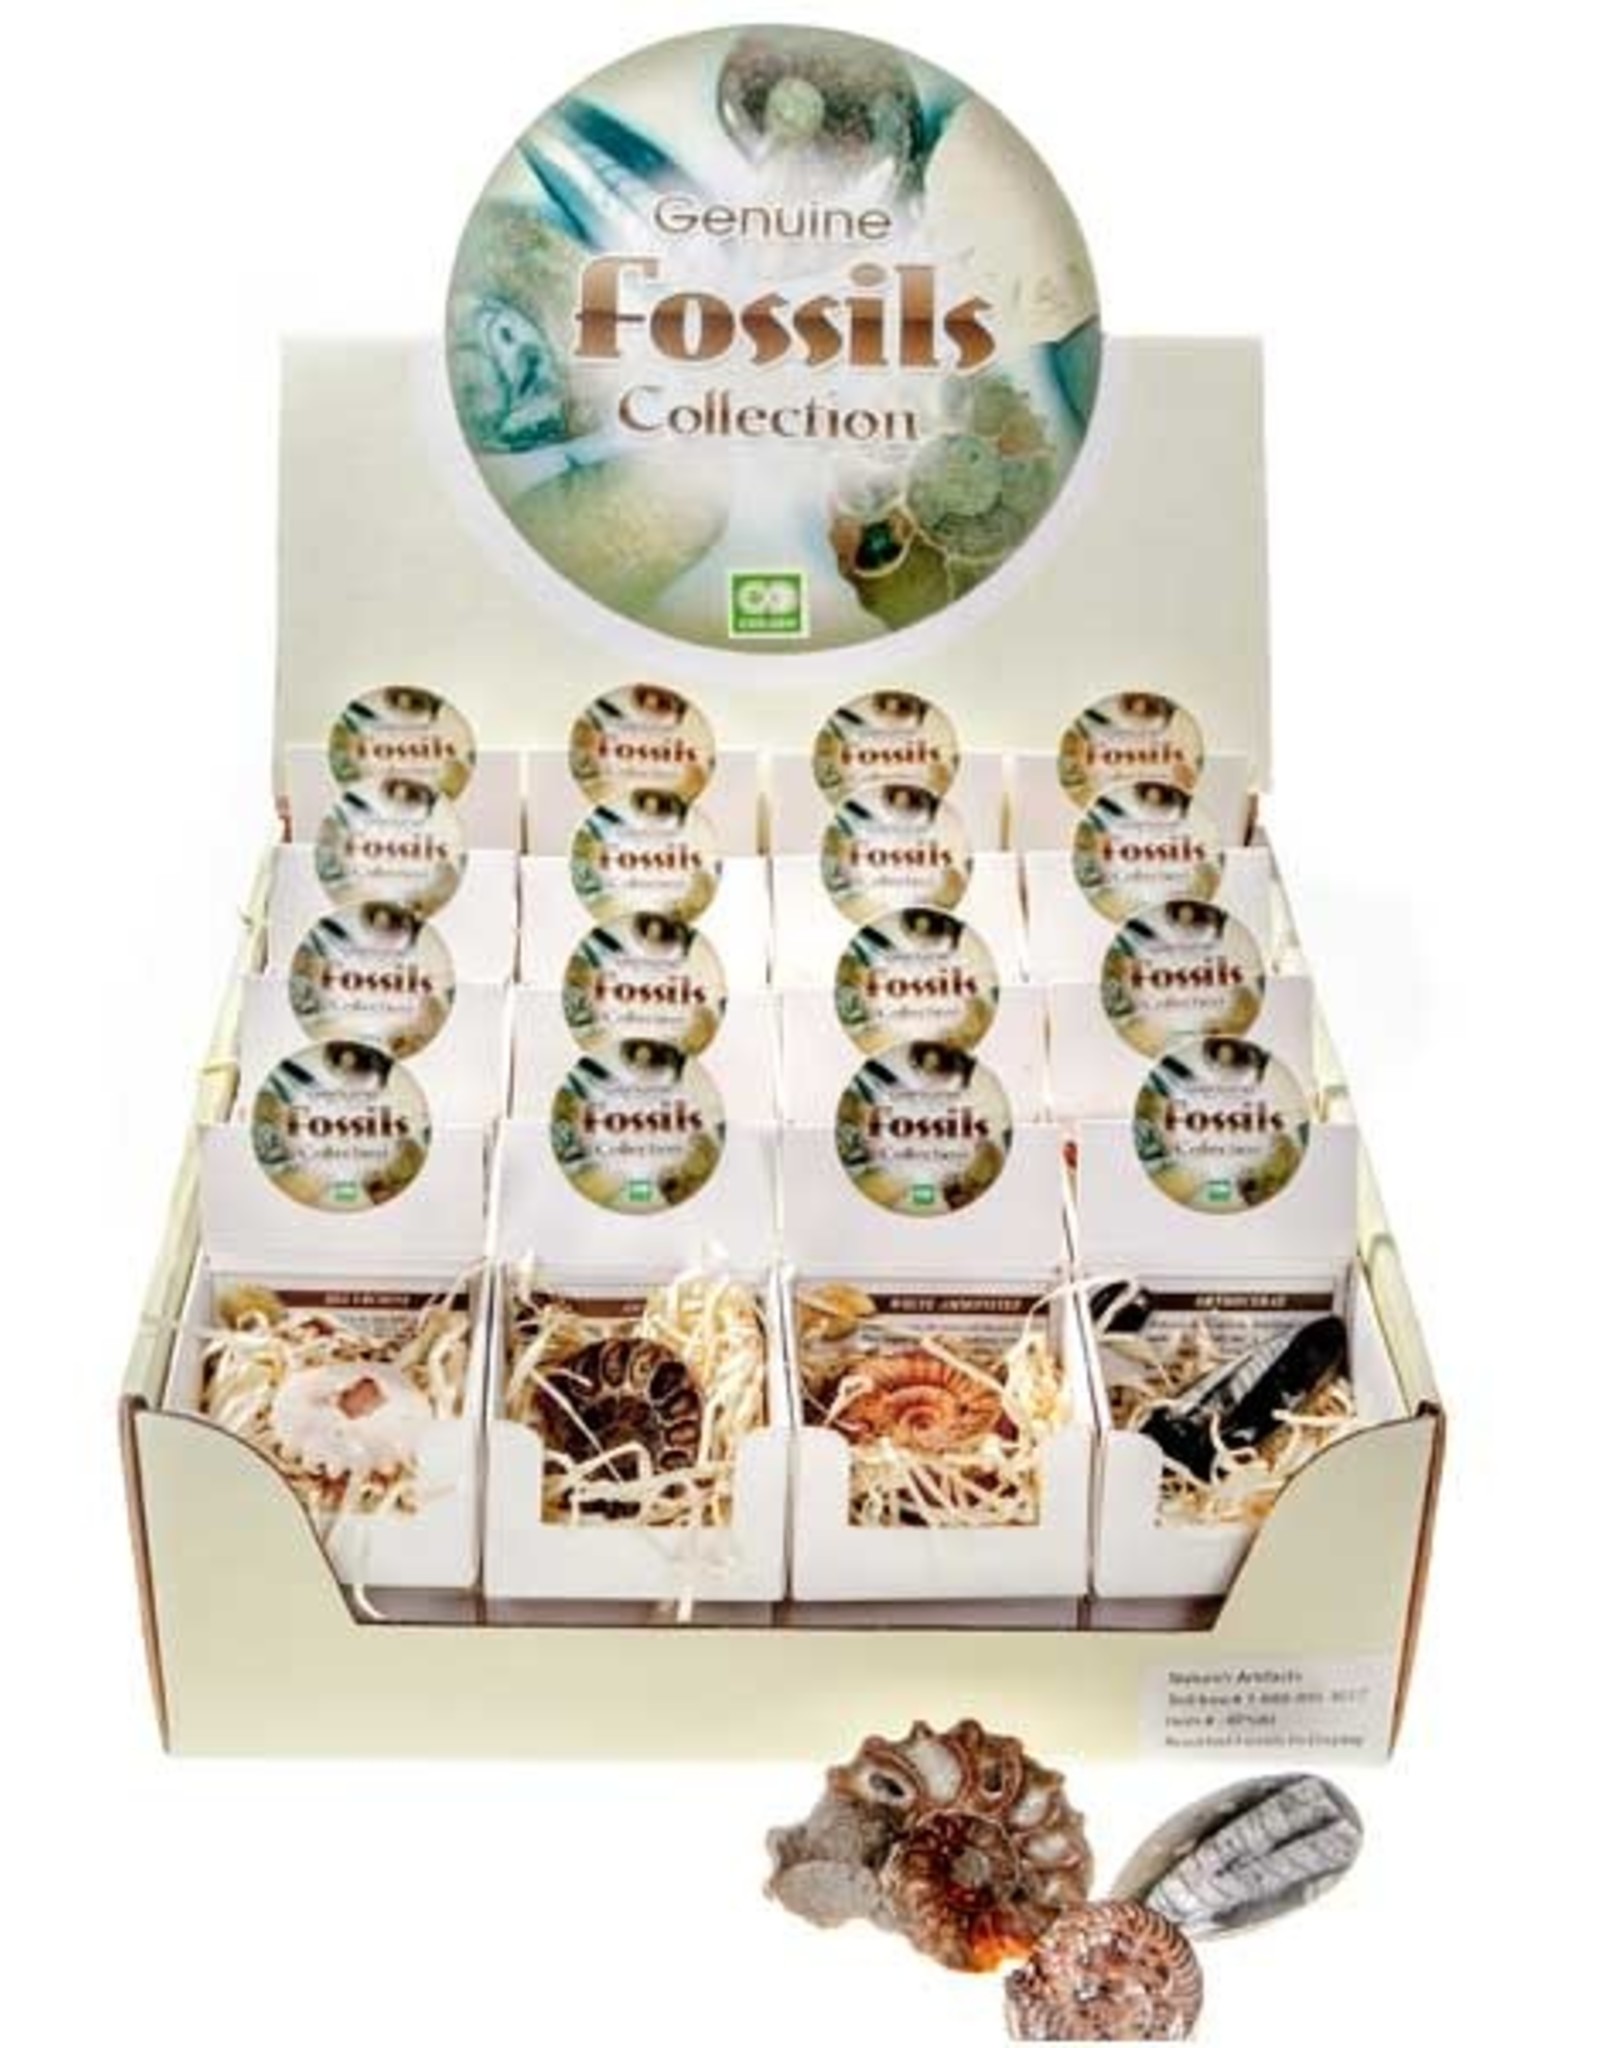 Fossils in Gift Boxes